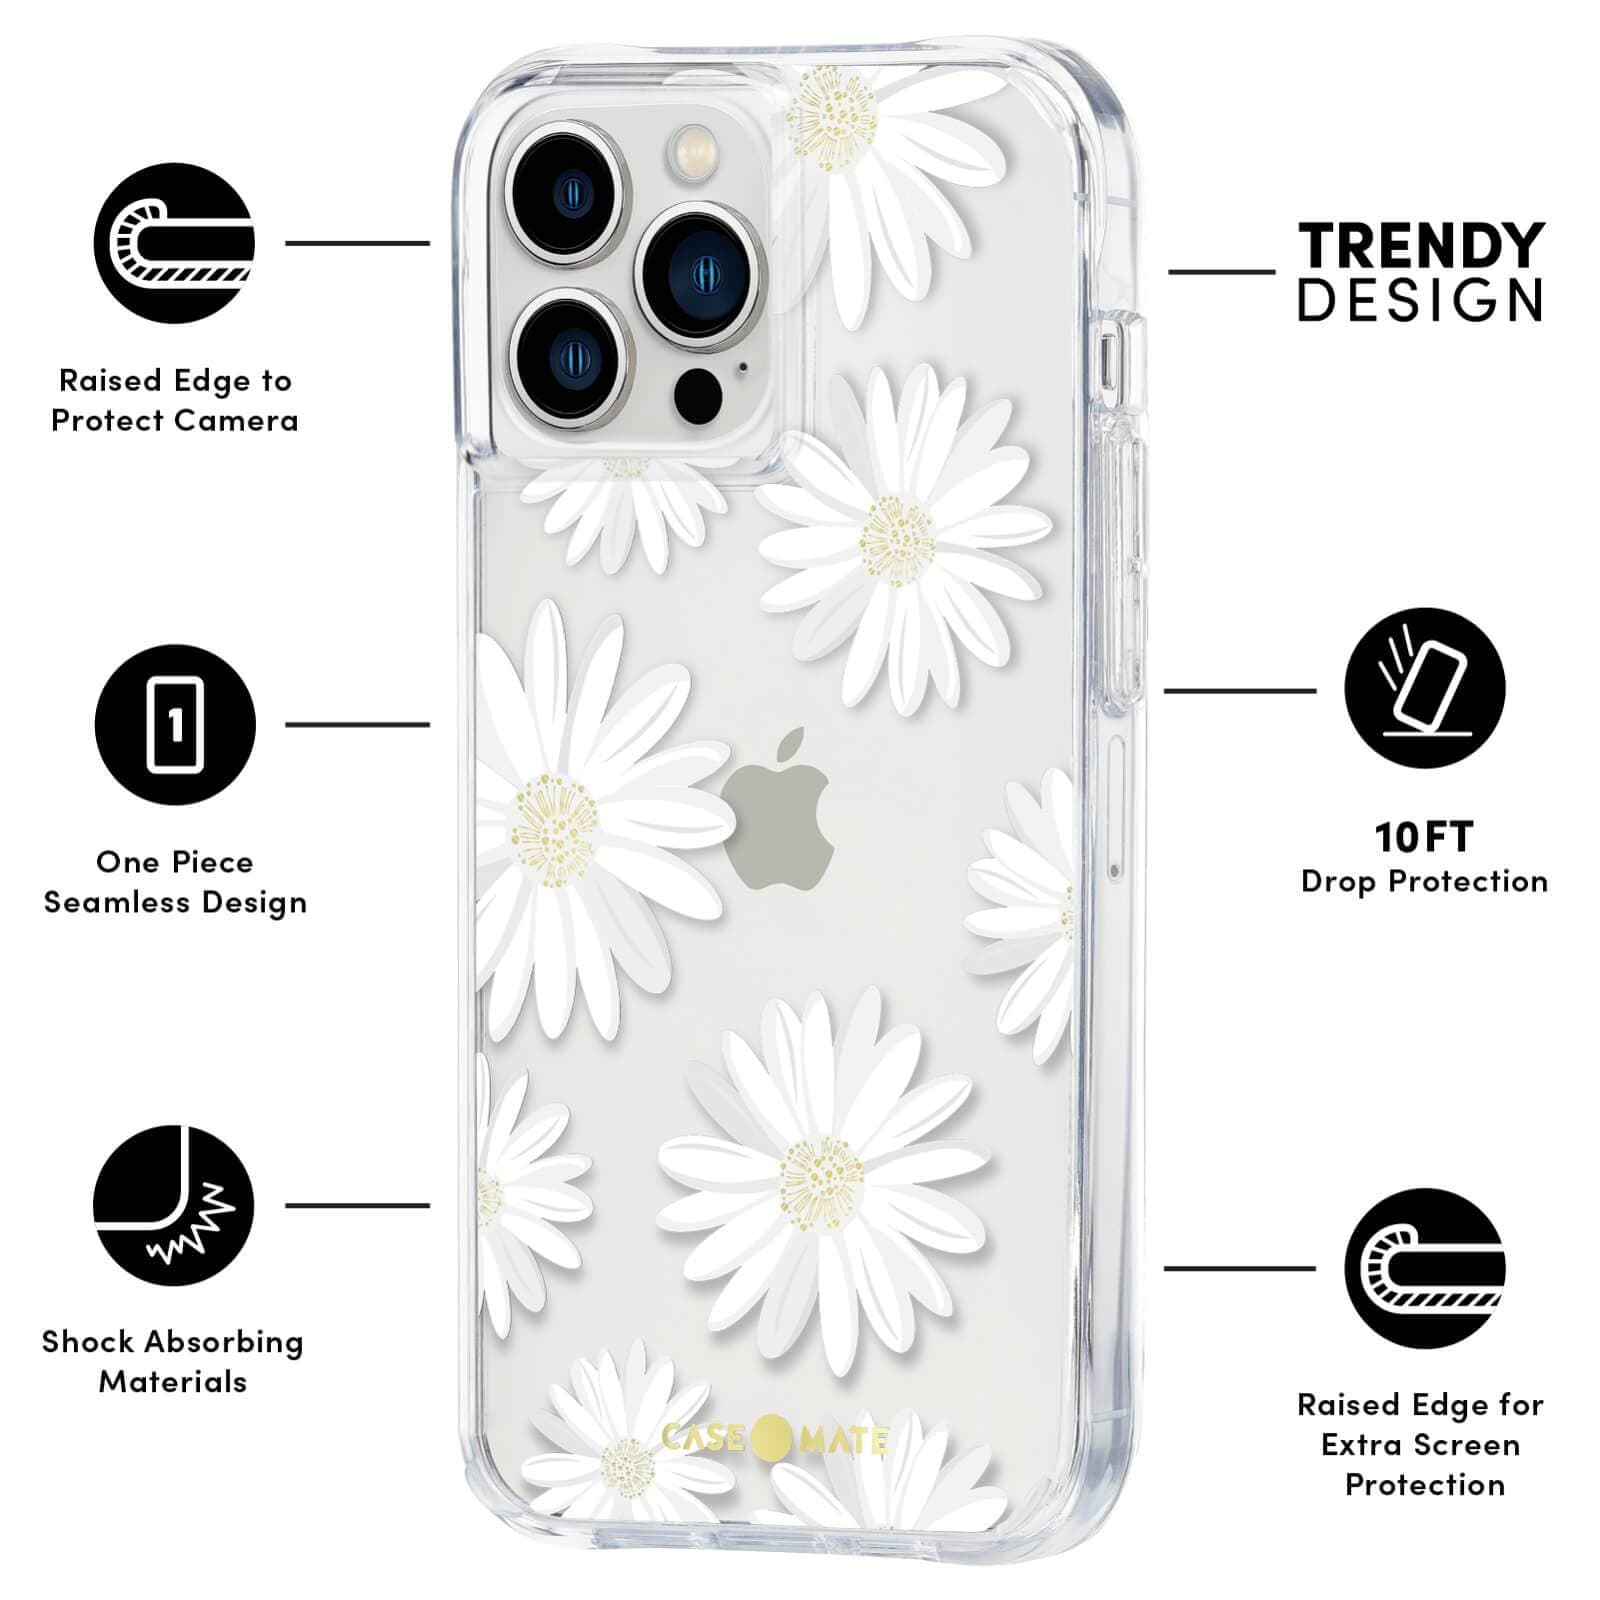 FEATURES: RAISED CAMERA TO PROTECT CAMERA, ONE PIECE SEAMLESS DESIGN, SHOCK ABSORBING MATERIALS, TRENDY DESIGN, 10 FT DROP PROTECTION, RAISED EDGE FOR EXTRA SCREEN PROTECTION. COLOR::GLITTER DAISIES